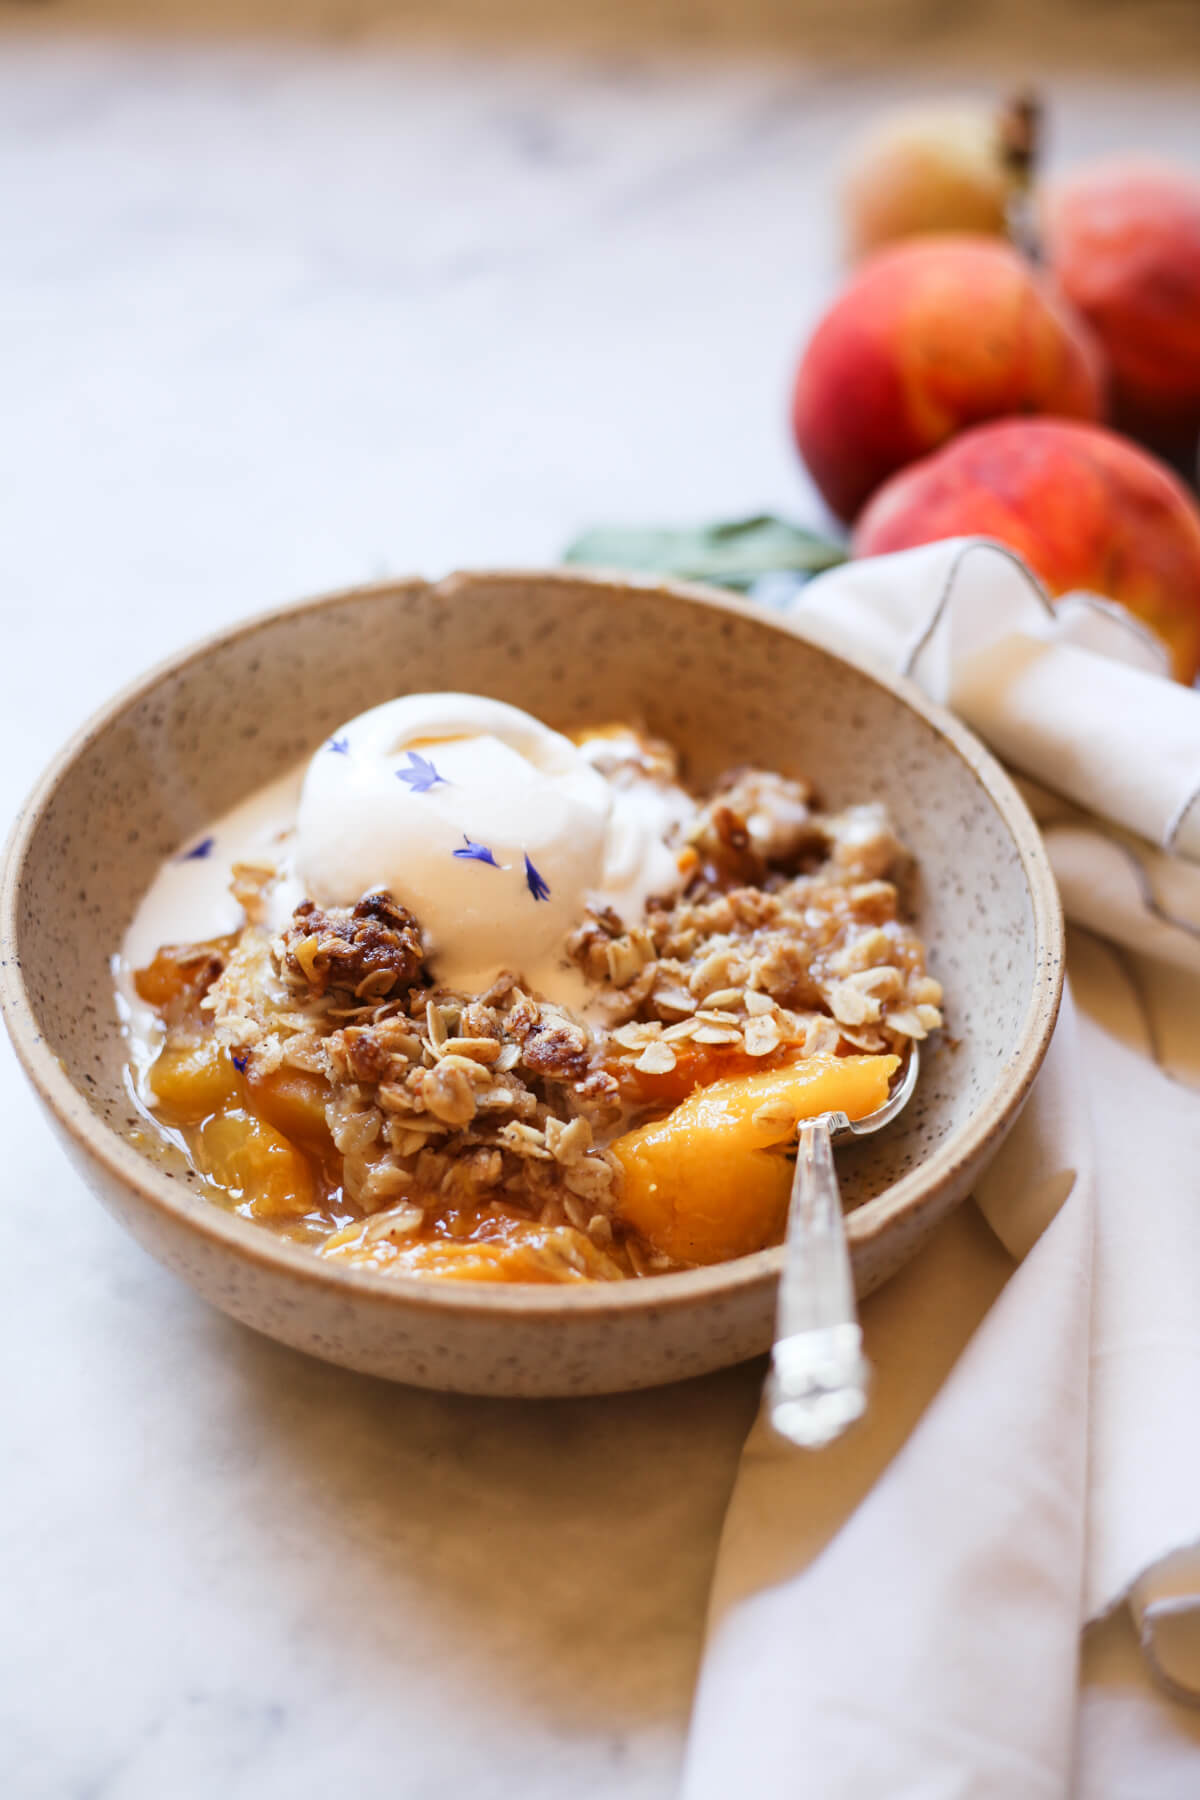 Peach crisp with oat crumble topping and a scoop of vanilla ice cream in a earthenware bowl on a white marble countertop. 